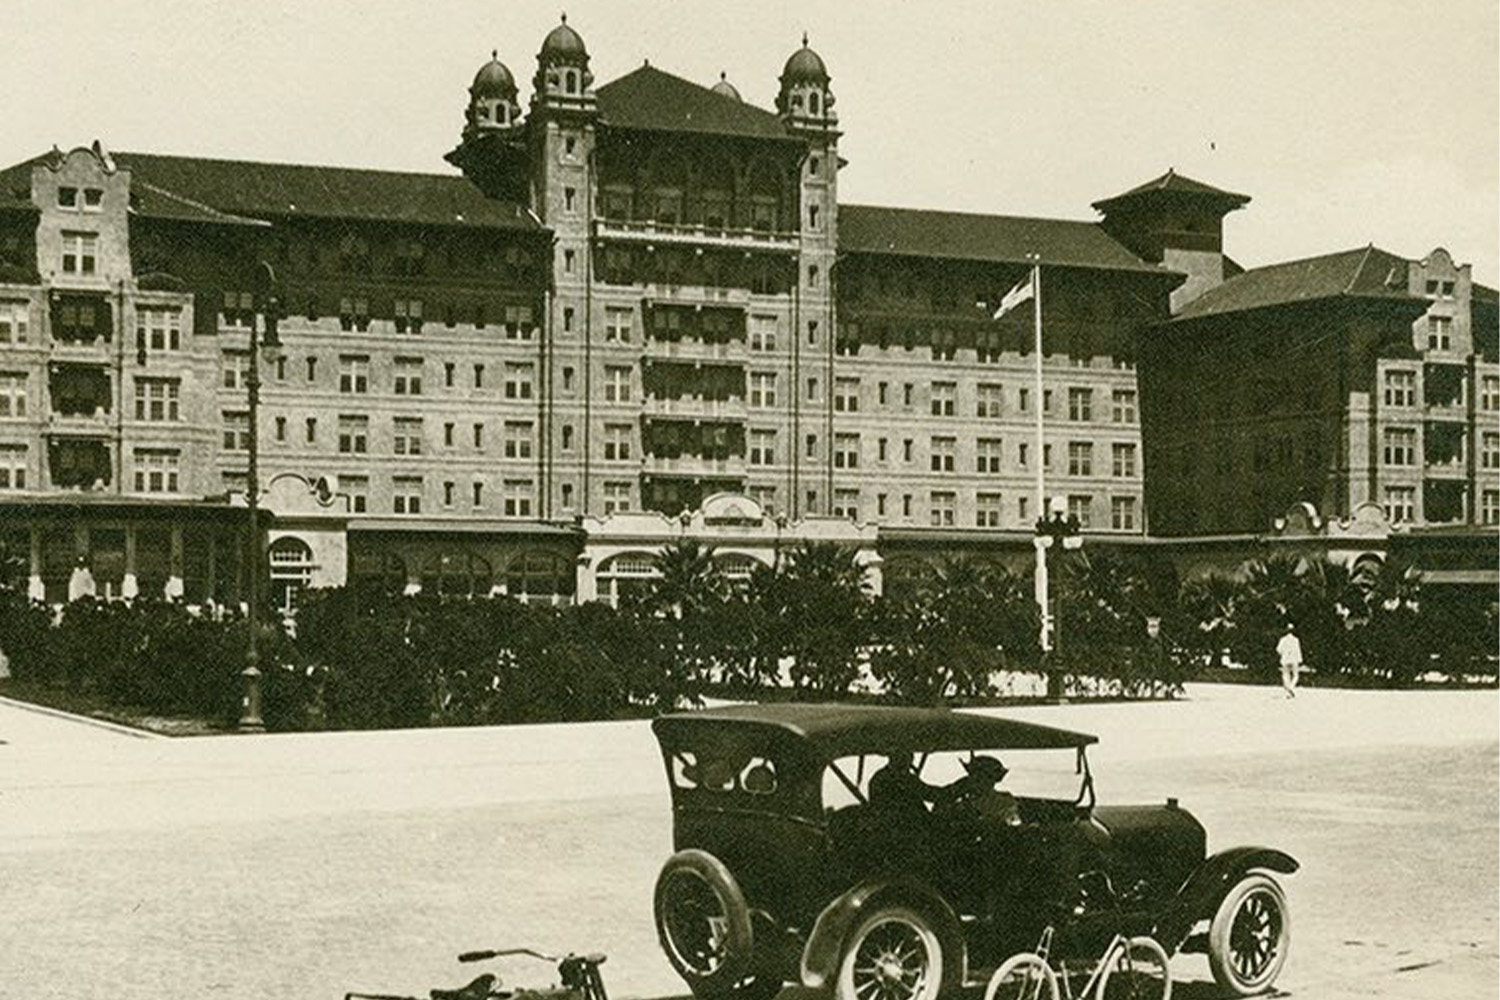 The Grand Galvez Hotel in Galveston, Texas as seen in an old black and white photo, when it was known as Hotel Galvez